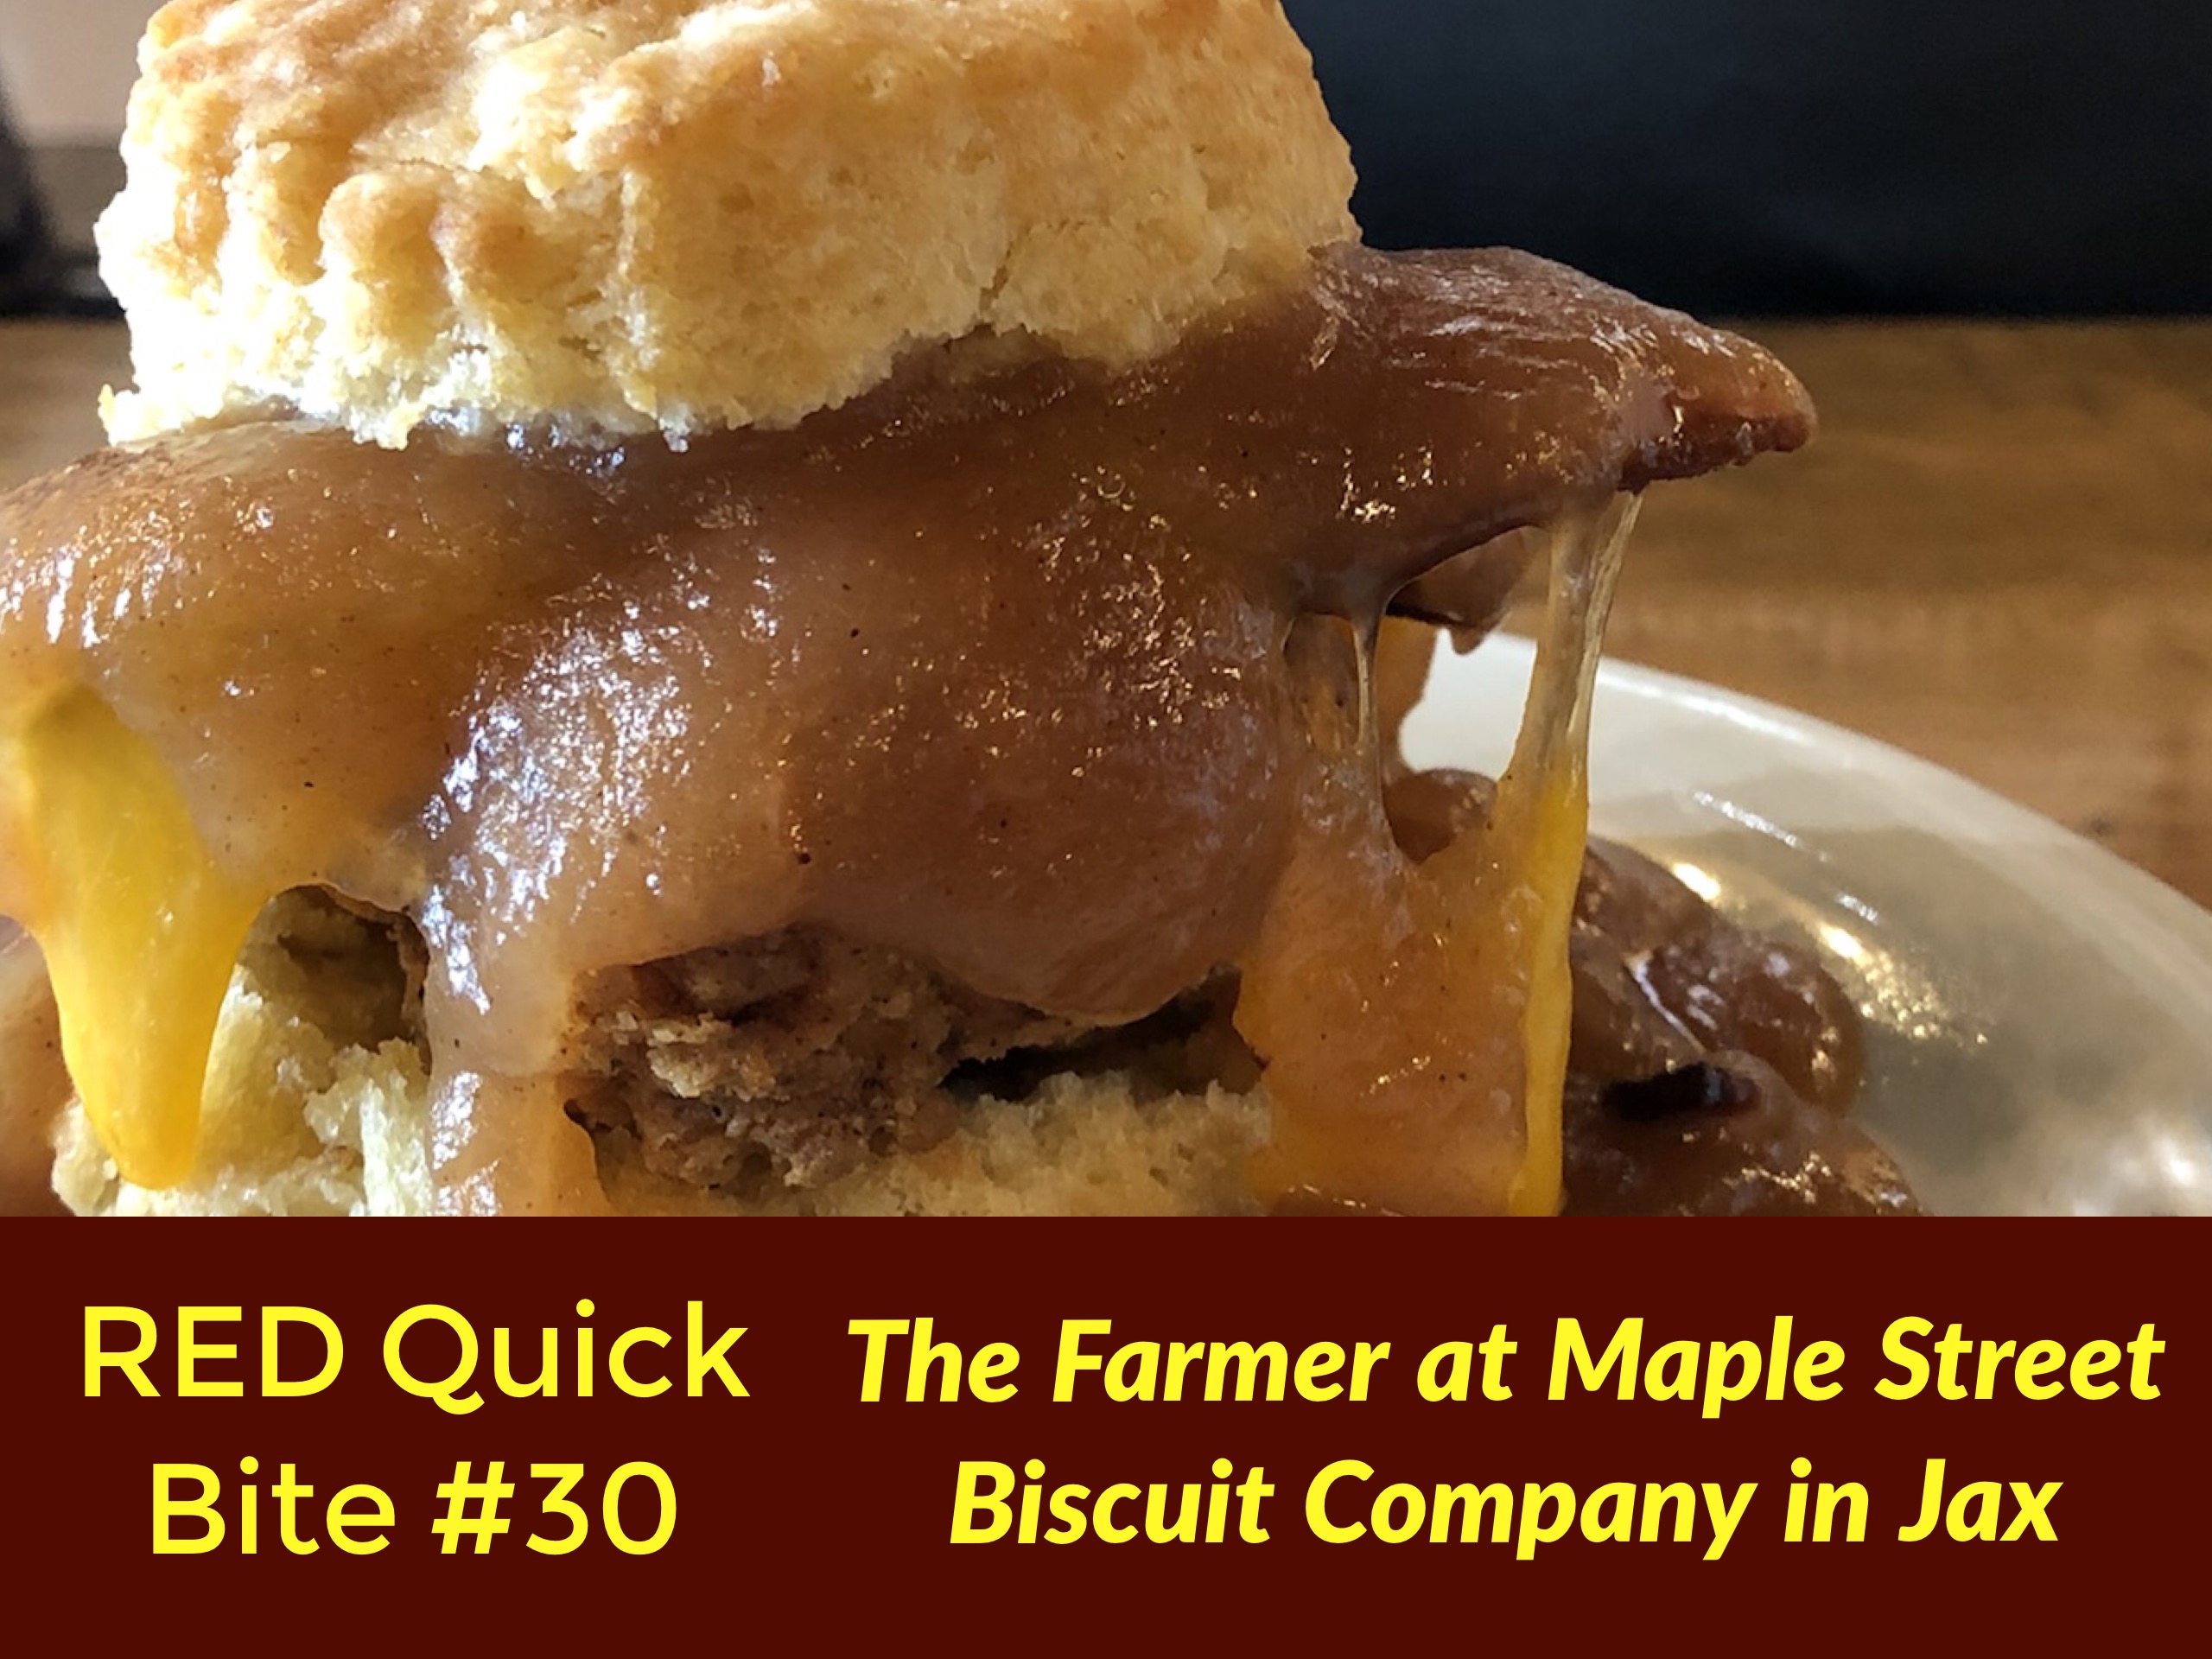 RED Quick Bite #30:  The Farmer at Maple Street Biscuit Company in Jax